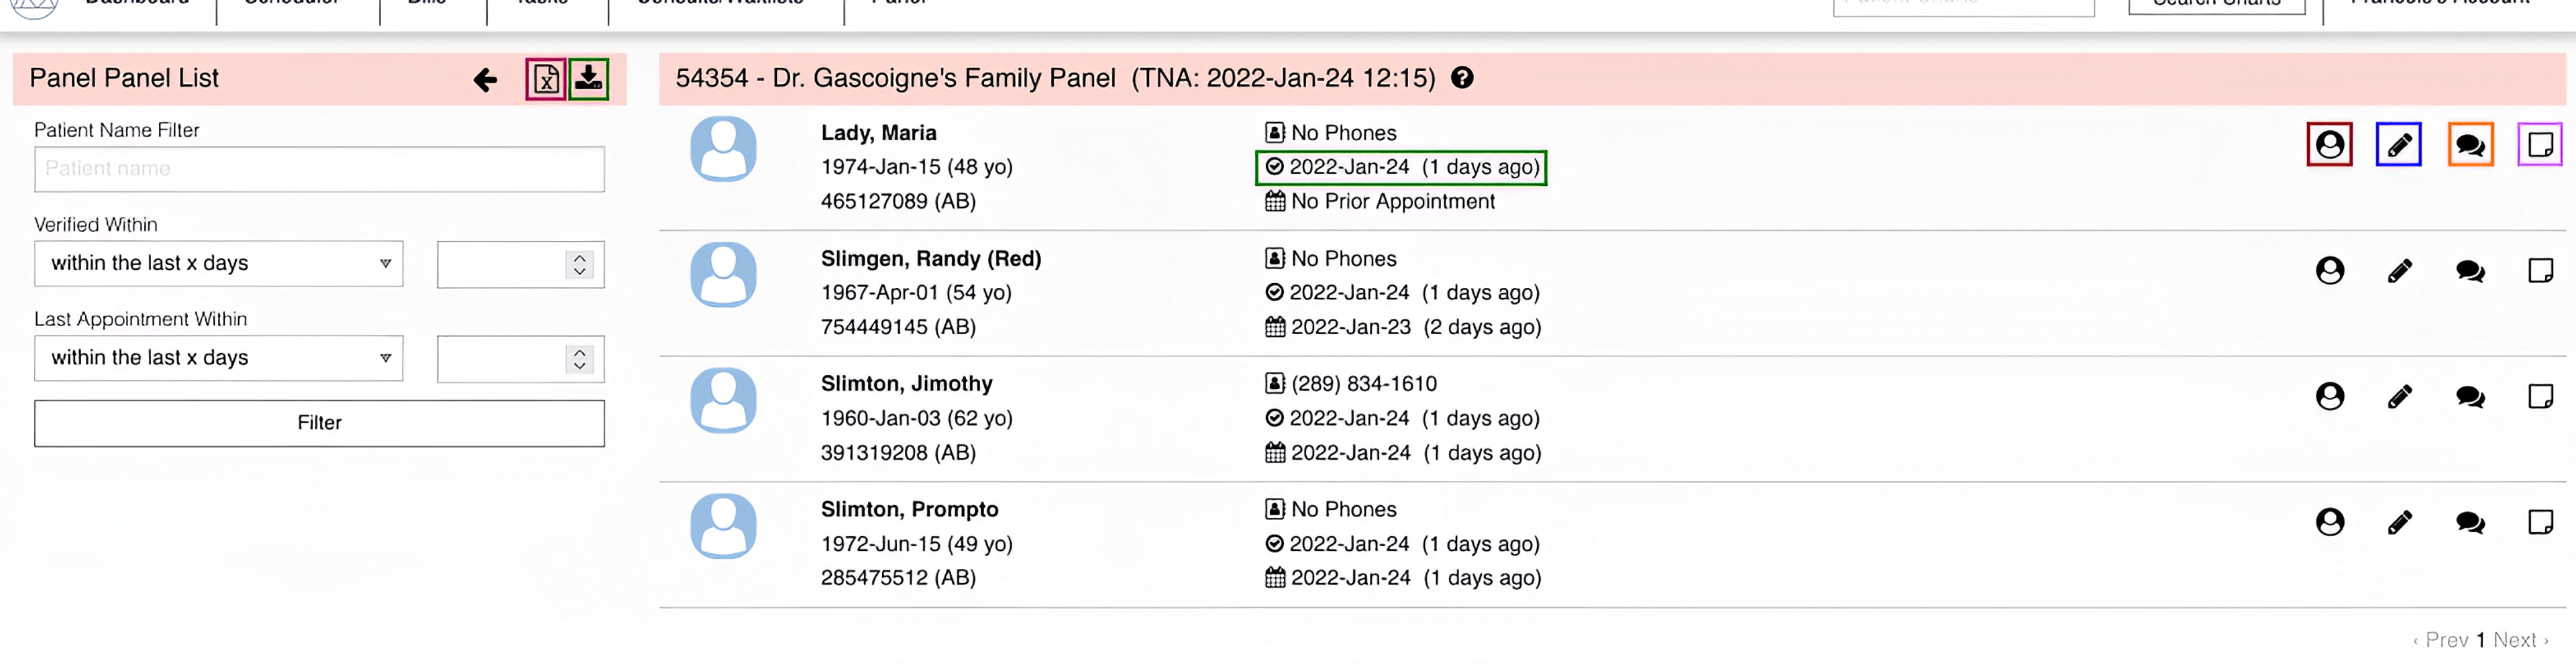 A screenshot of a panel list with multiple patients